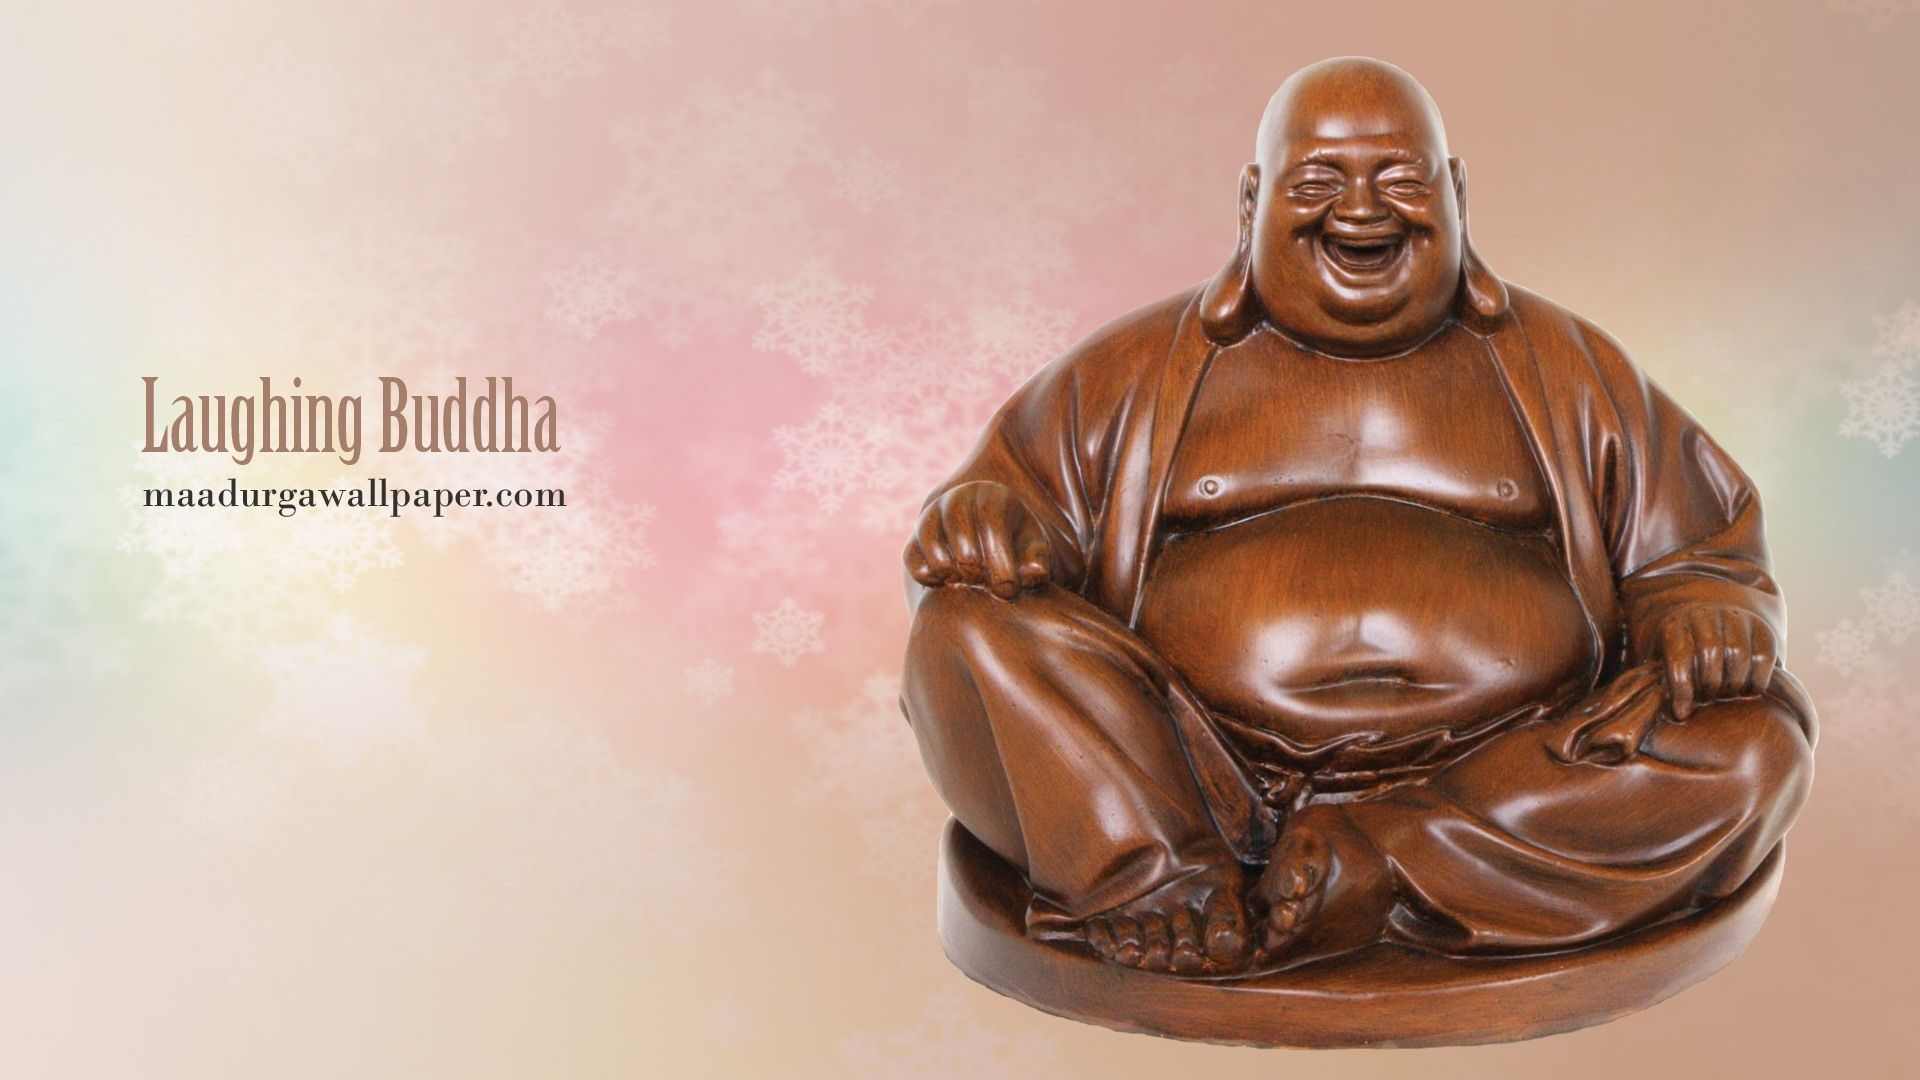 Laughing Buddha PC Wallpapers Wallpaper Cave